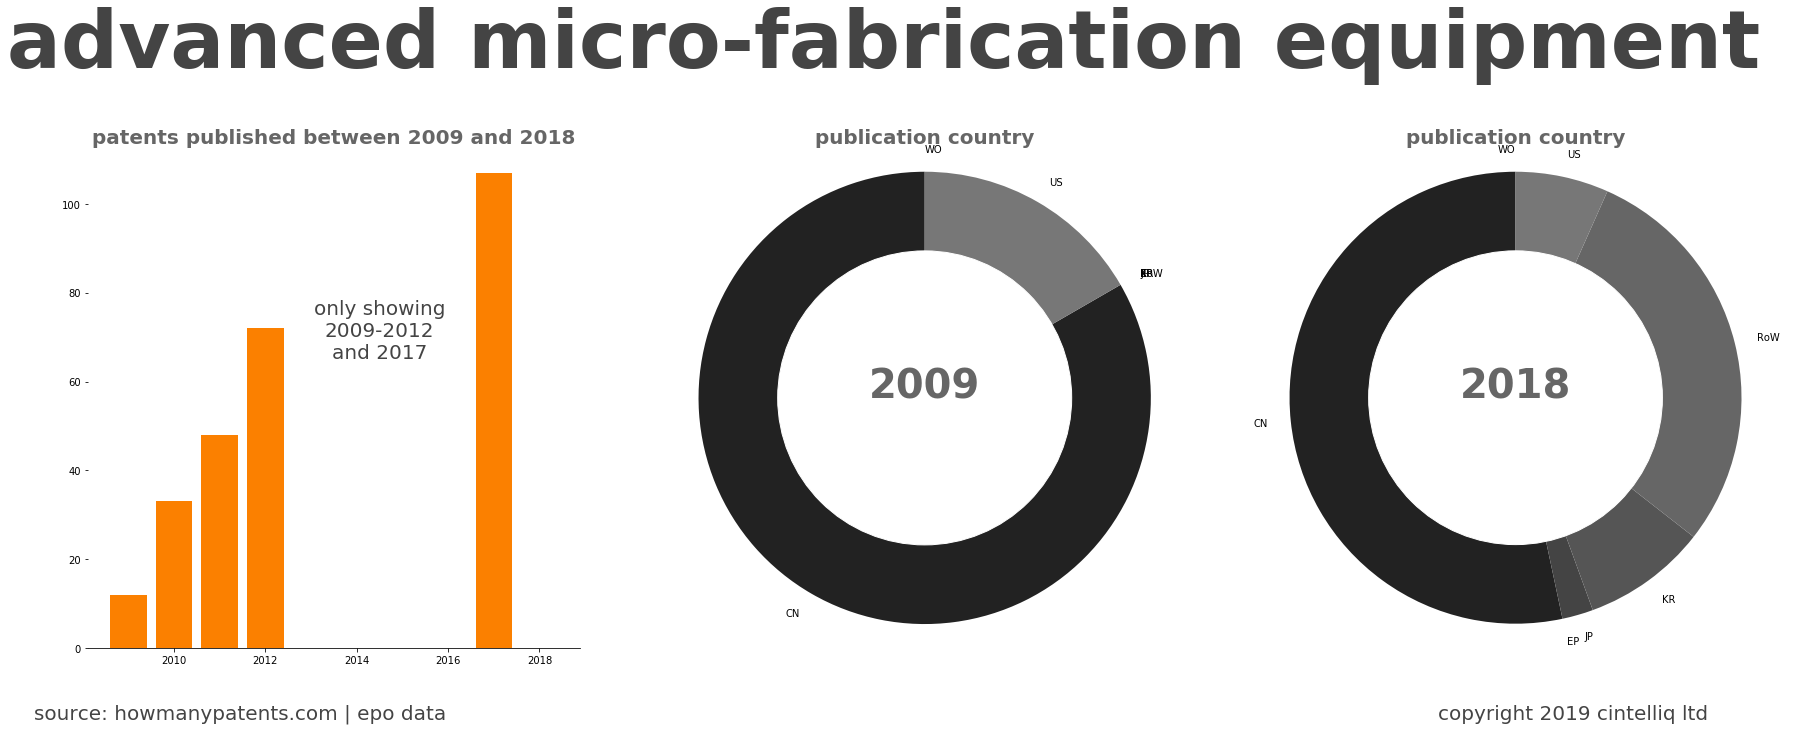 summary of patents for Advanced Micro-Fabrication Equipment 